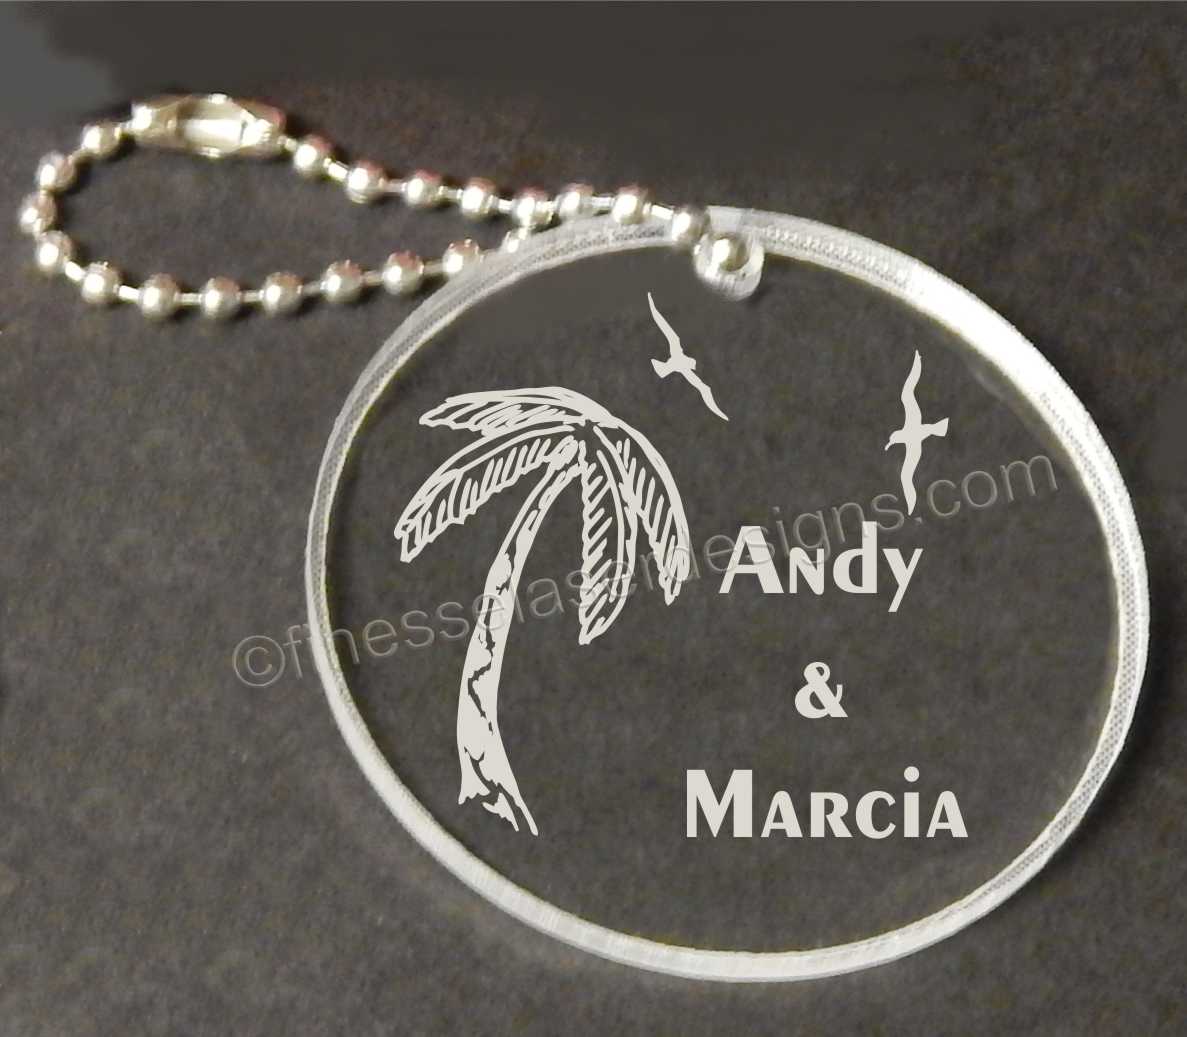 round acrylic key chain designed with palm tree, seagulls and names along with a small metal chain attached